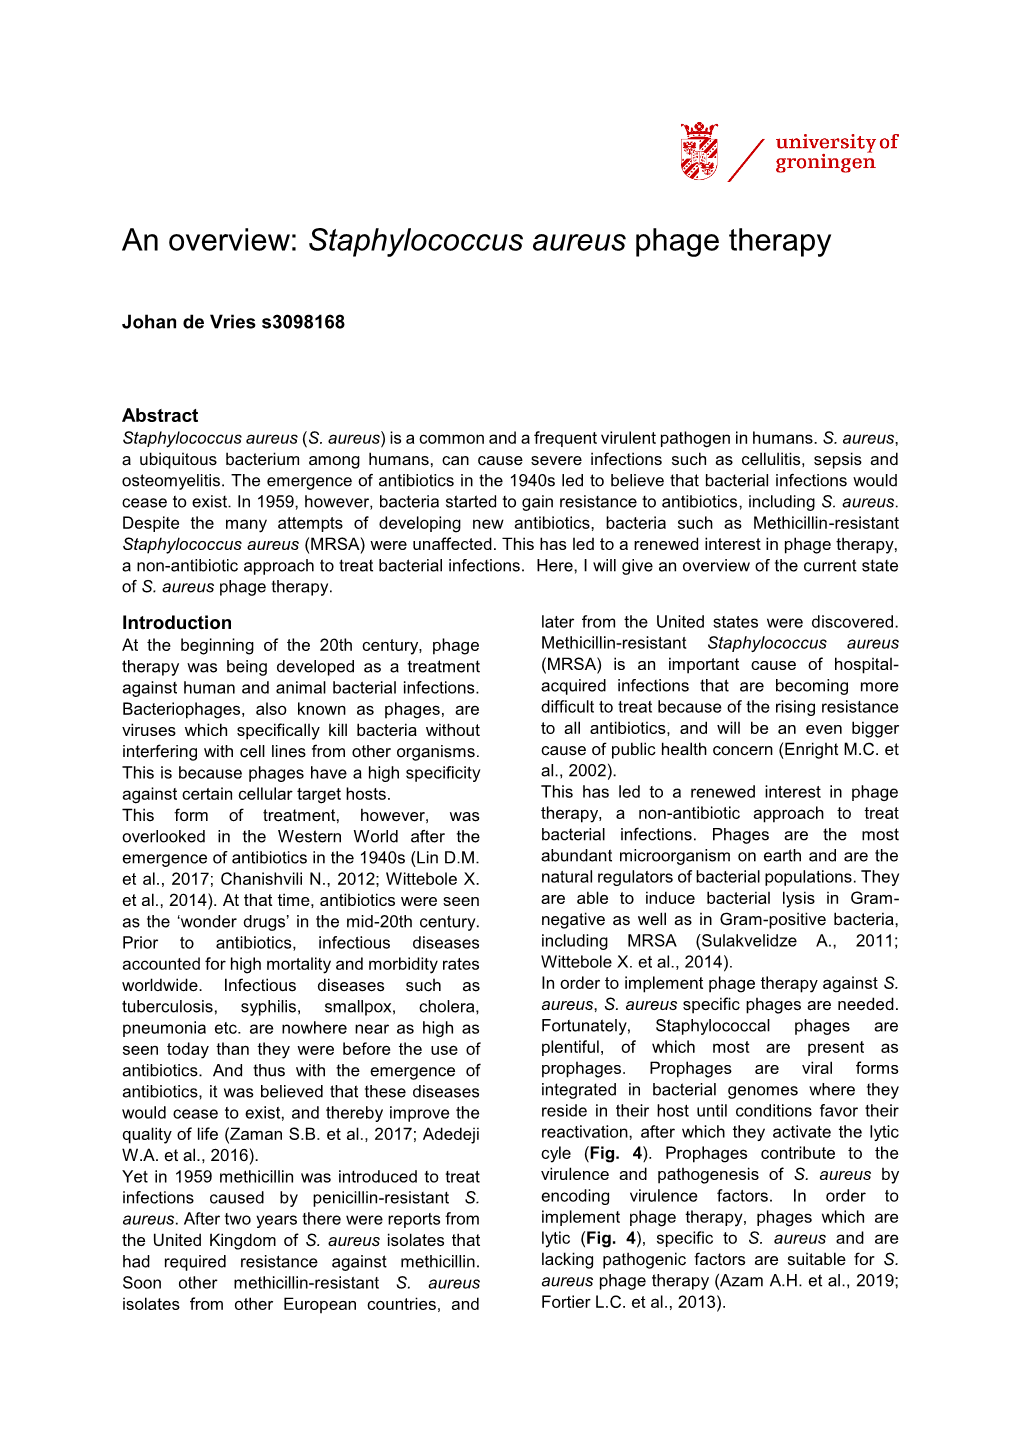 An Overview: Staphylococcus Aureus Phage Therapy